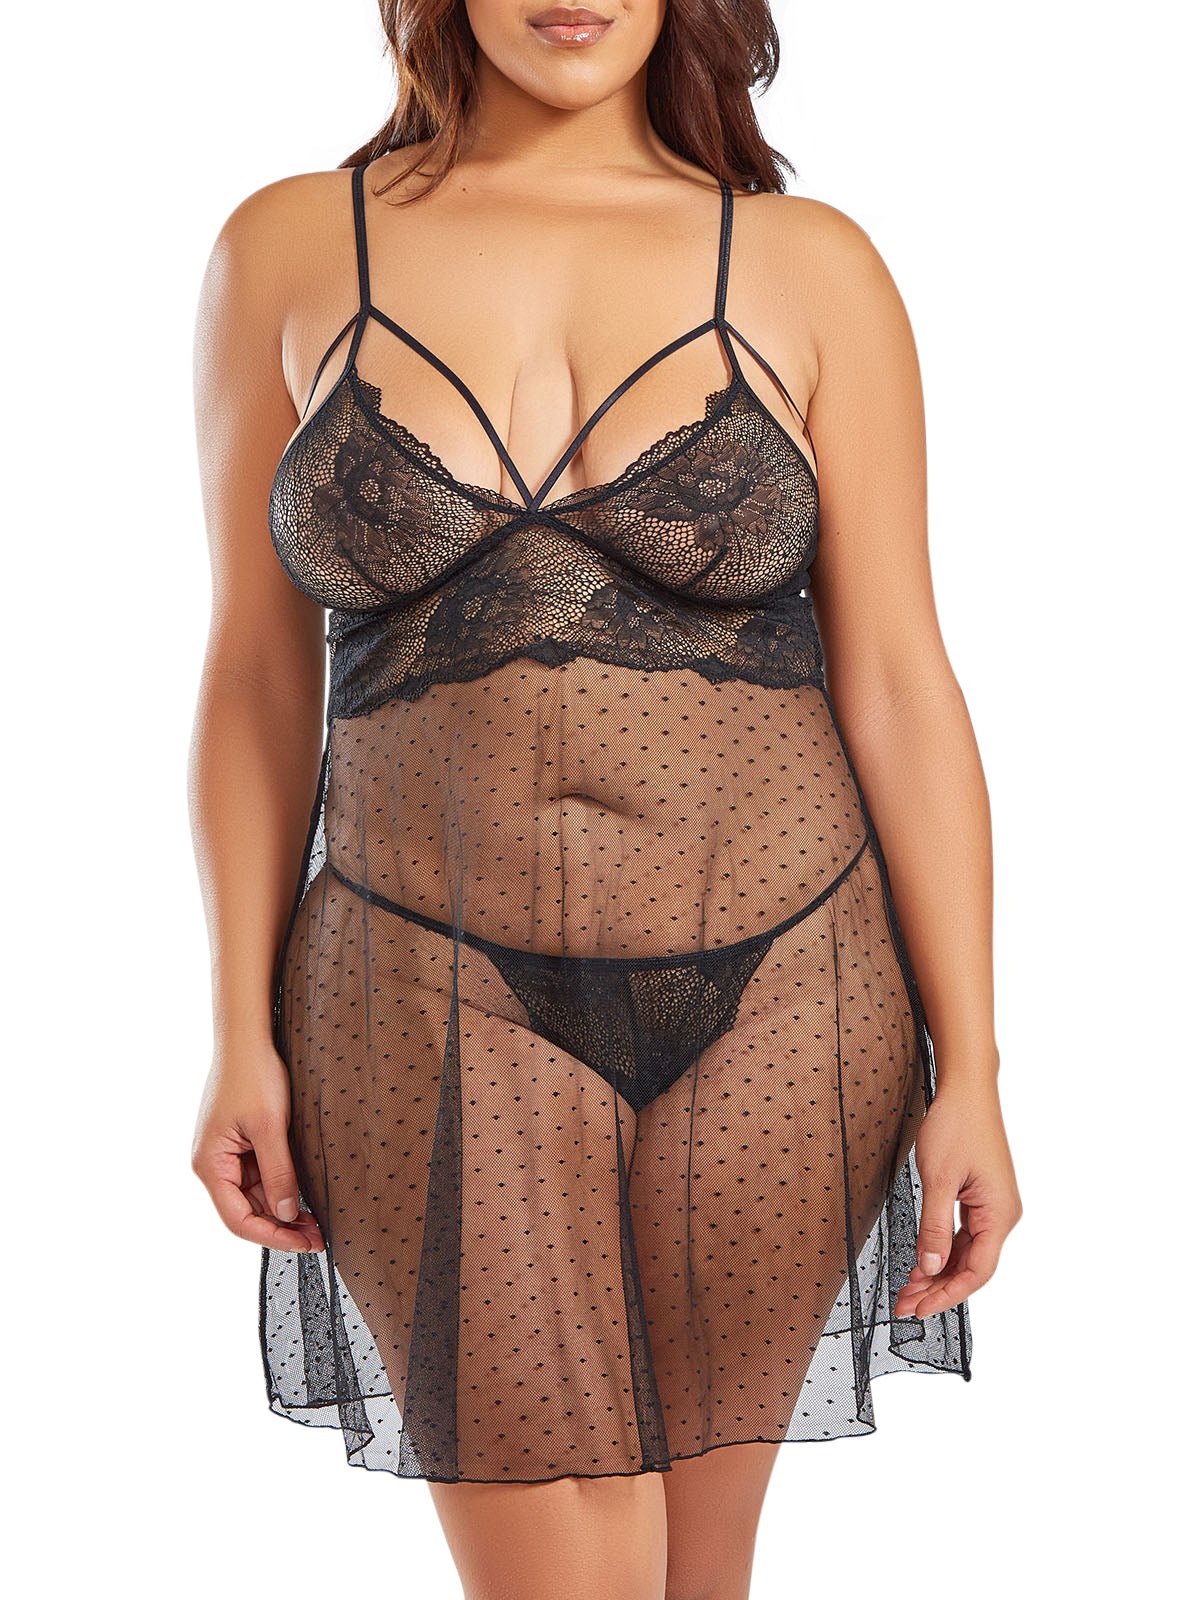 iCollection Babydoll Women&#39;s Everly Plus Size Babydoll Lingerie